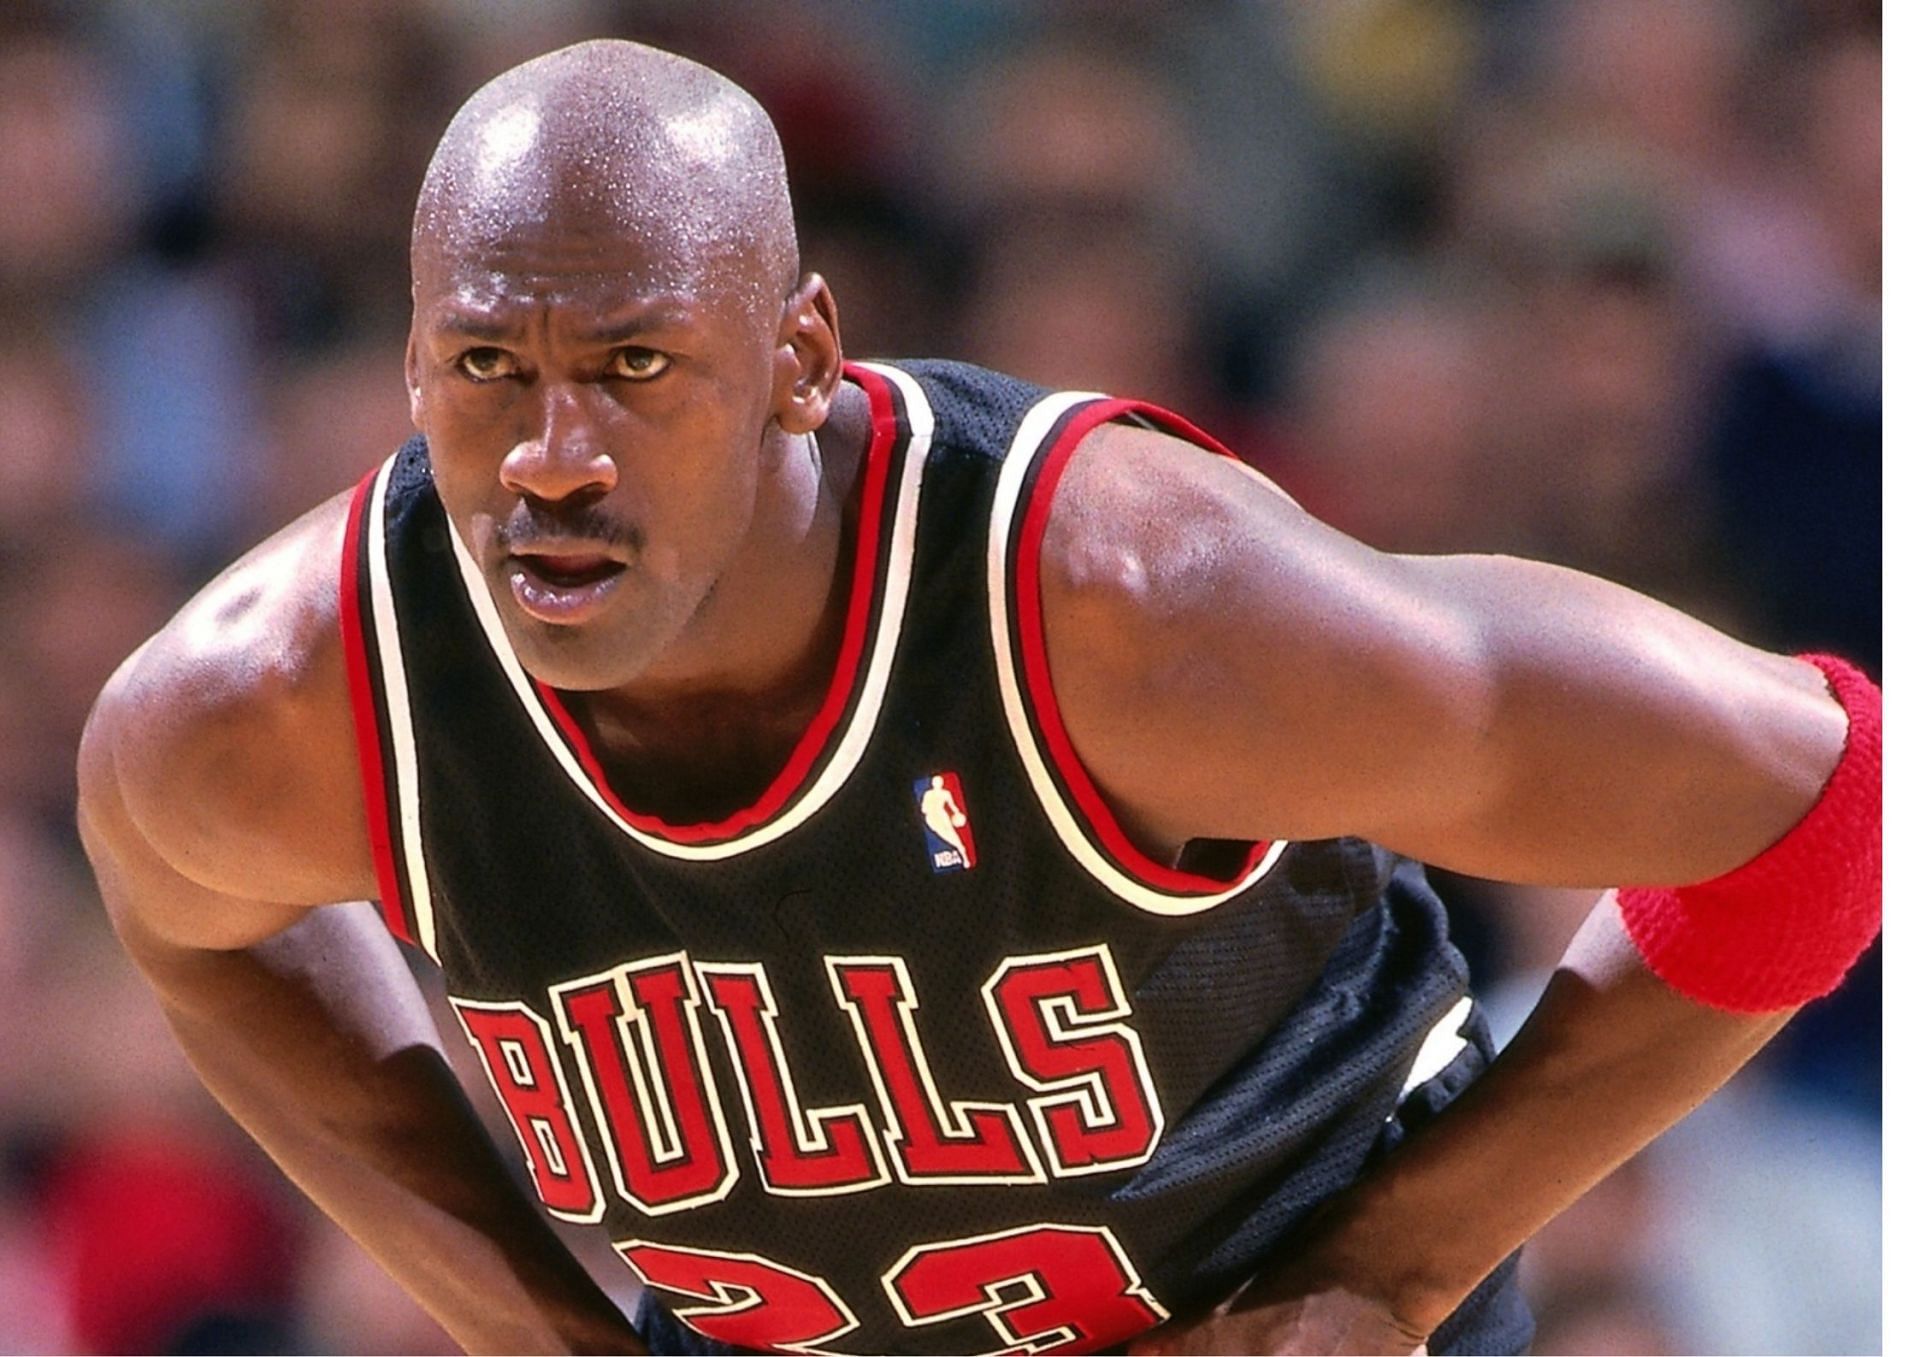 Michael Jordan changed basketball and the NBA in so many different ways.